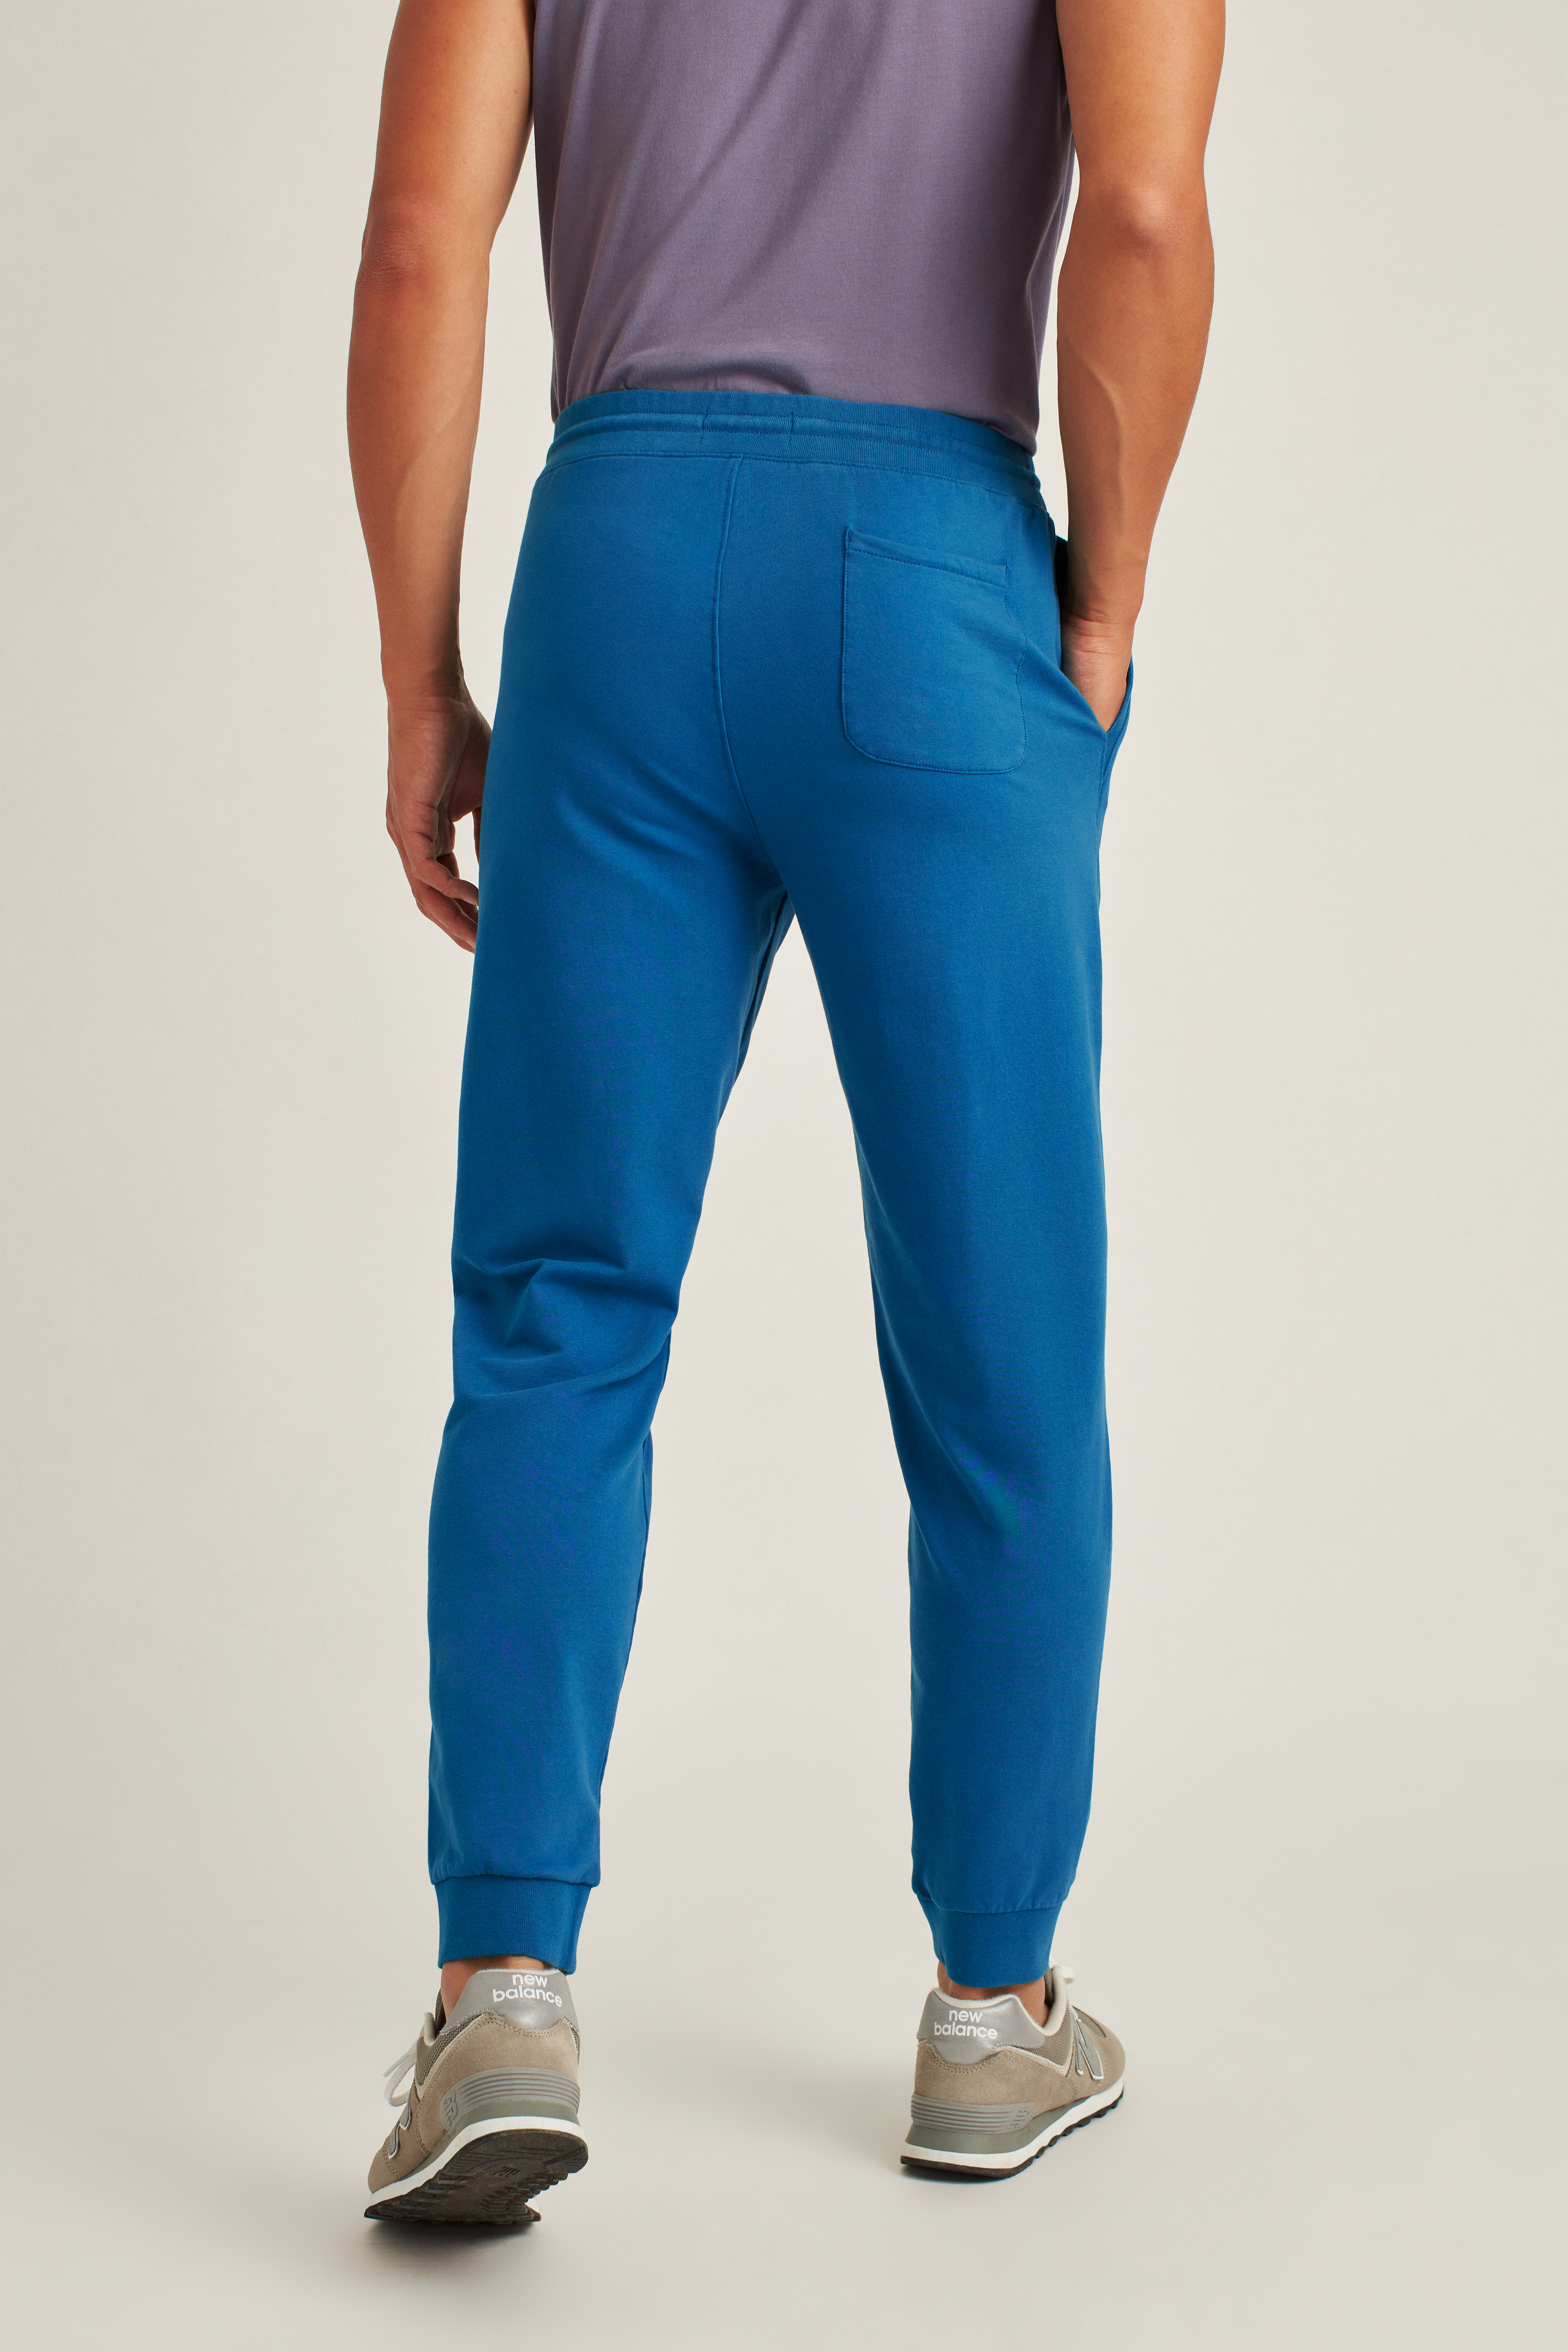 Stretch French Terry Sweatpants